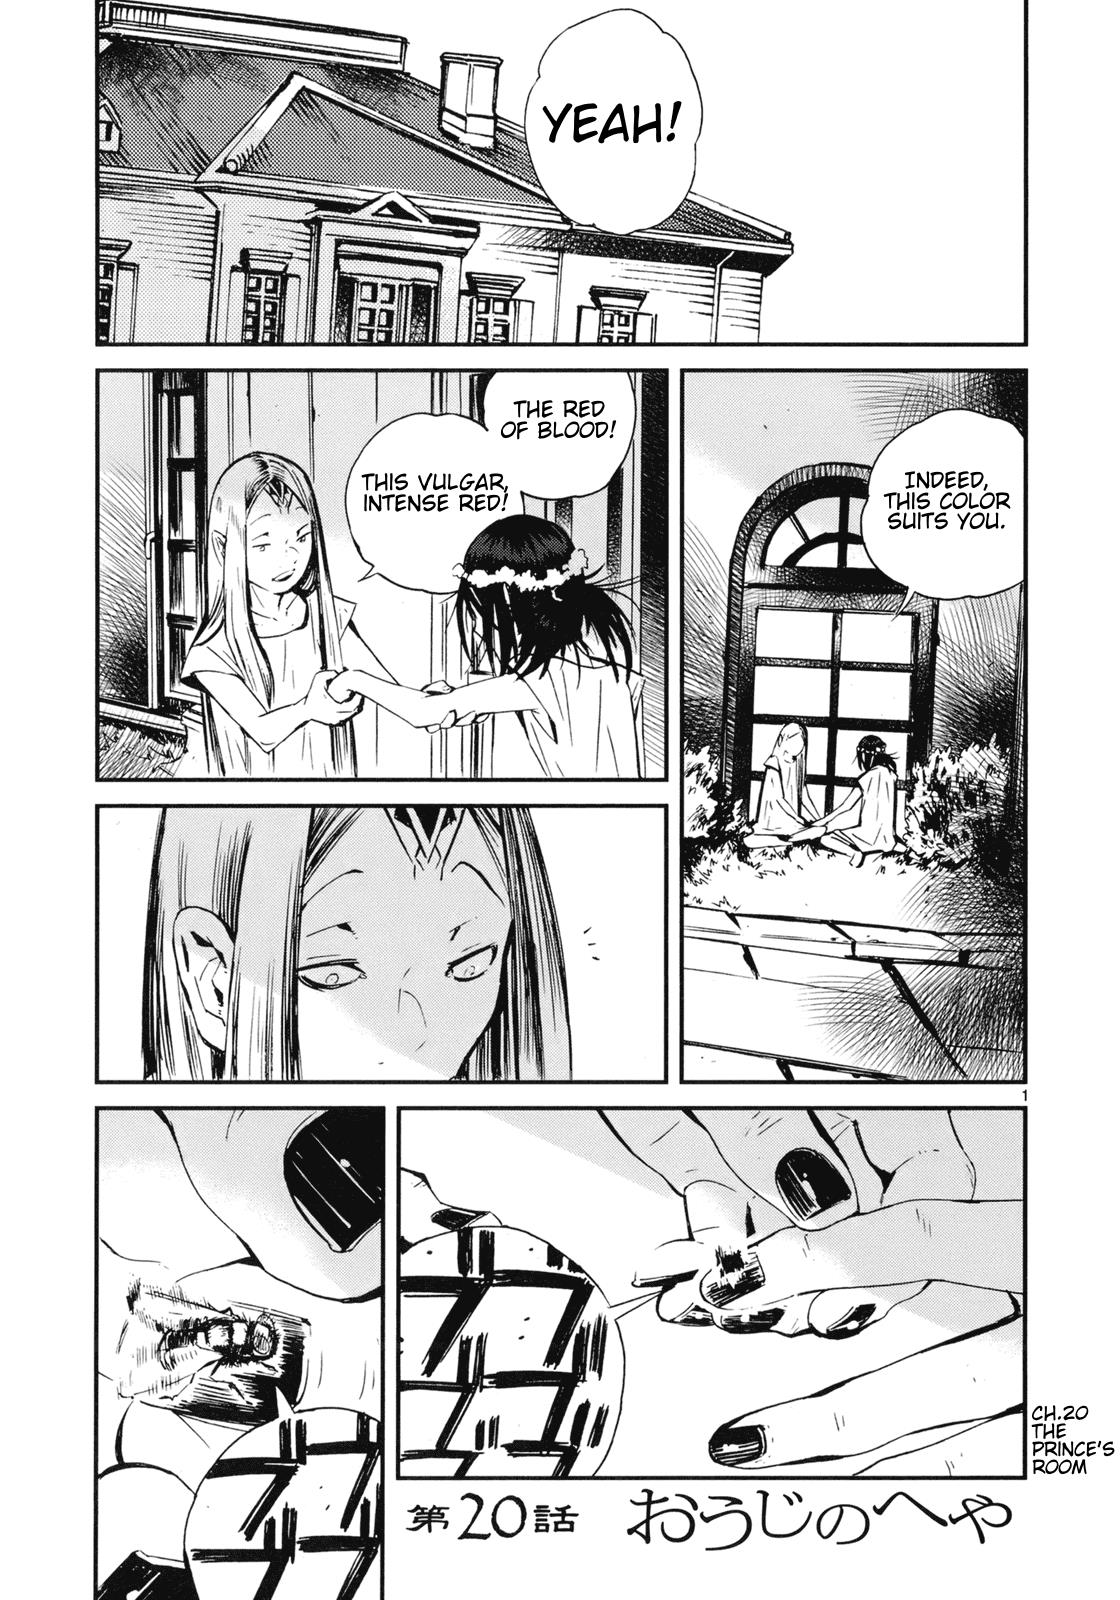 Yorukumo Vol.3 Chapter 20: The Prince's Room - Picture 1